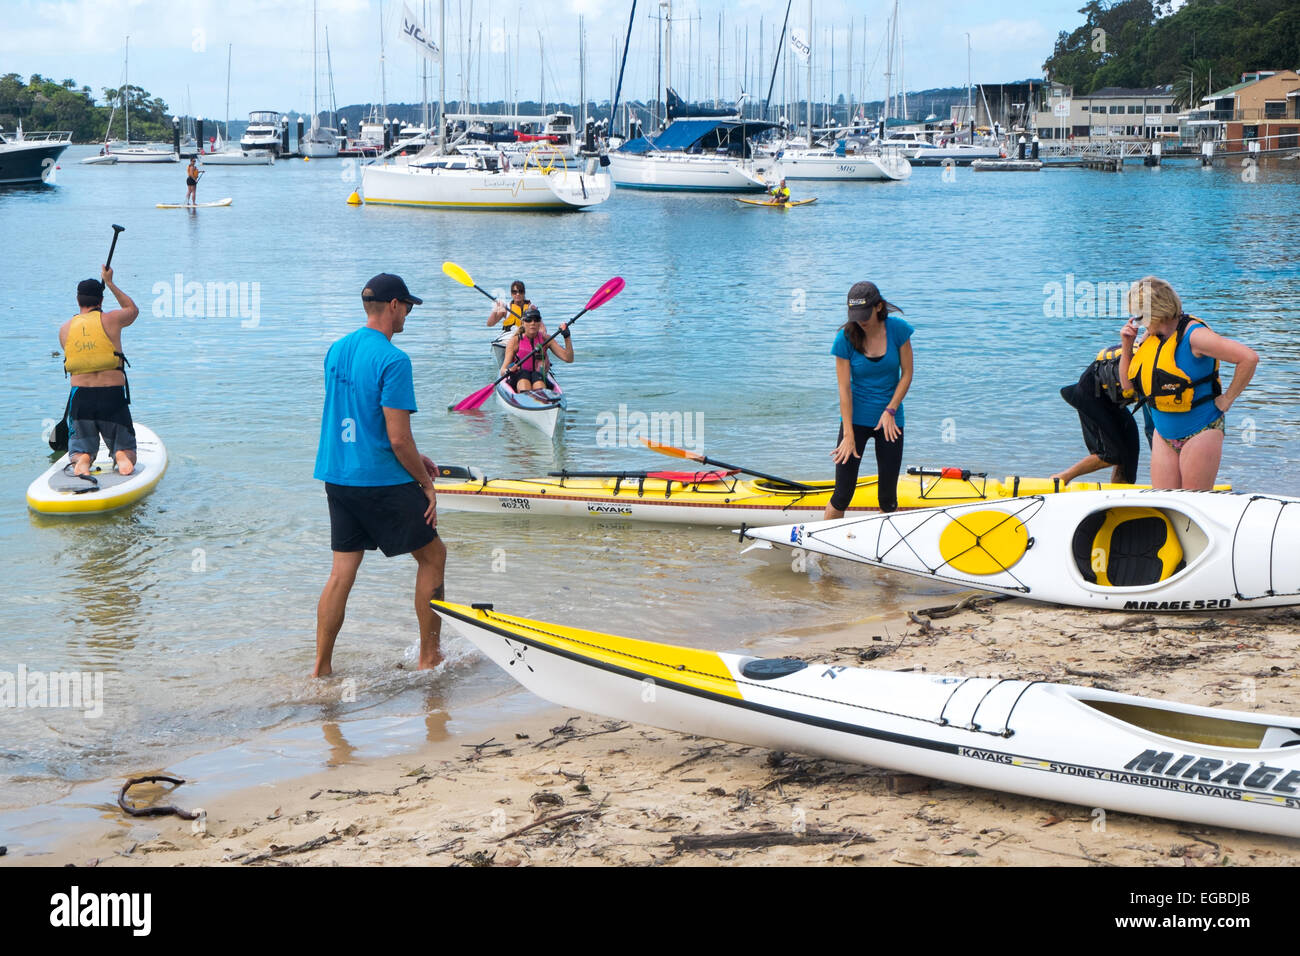 Sydney kayak club located at the Spit on middle harbour,Sydney where boats can be bought or hired, NSW, Australia Stock Photo